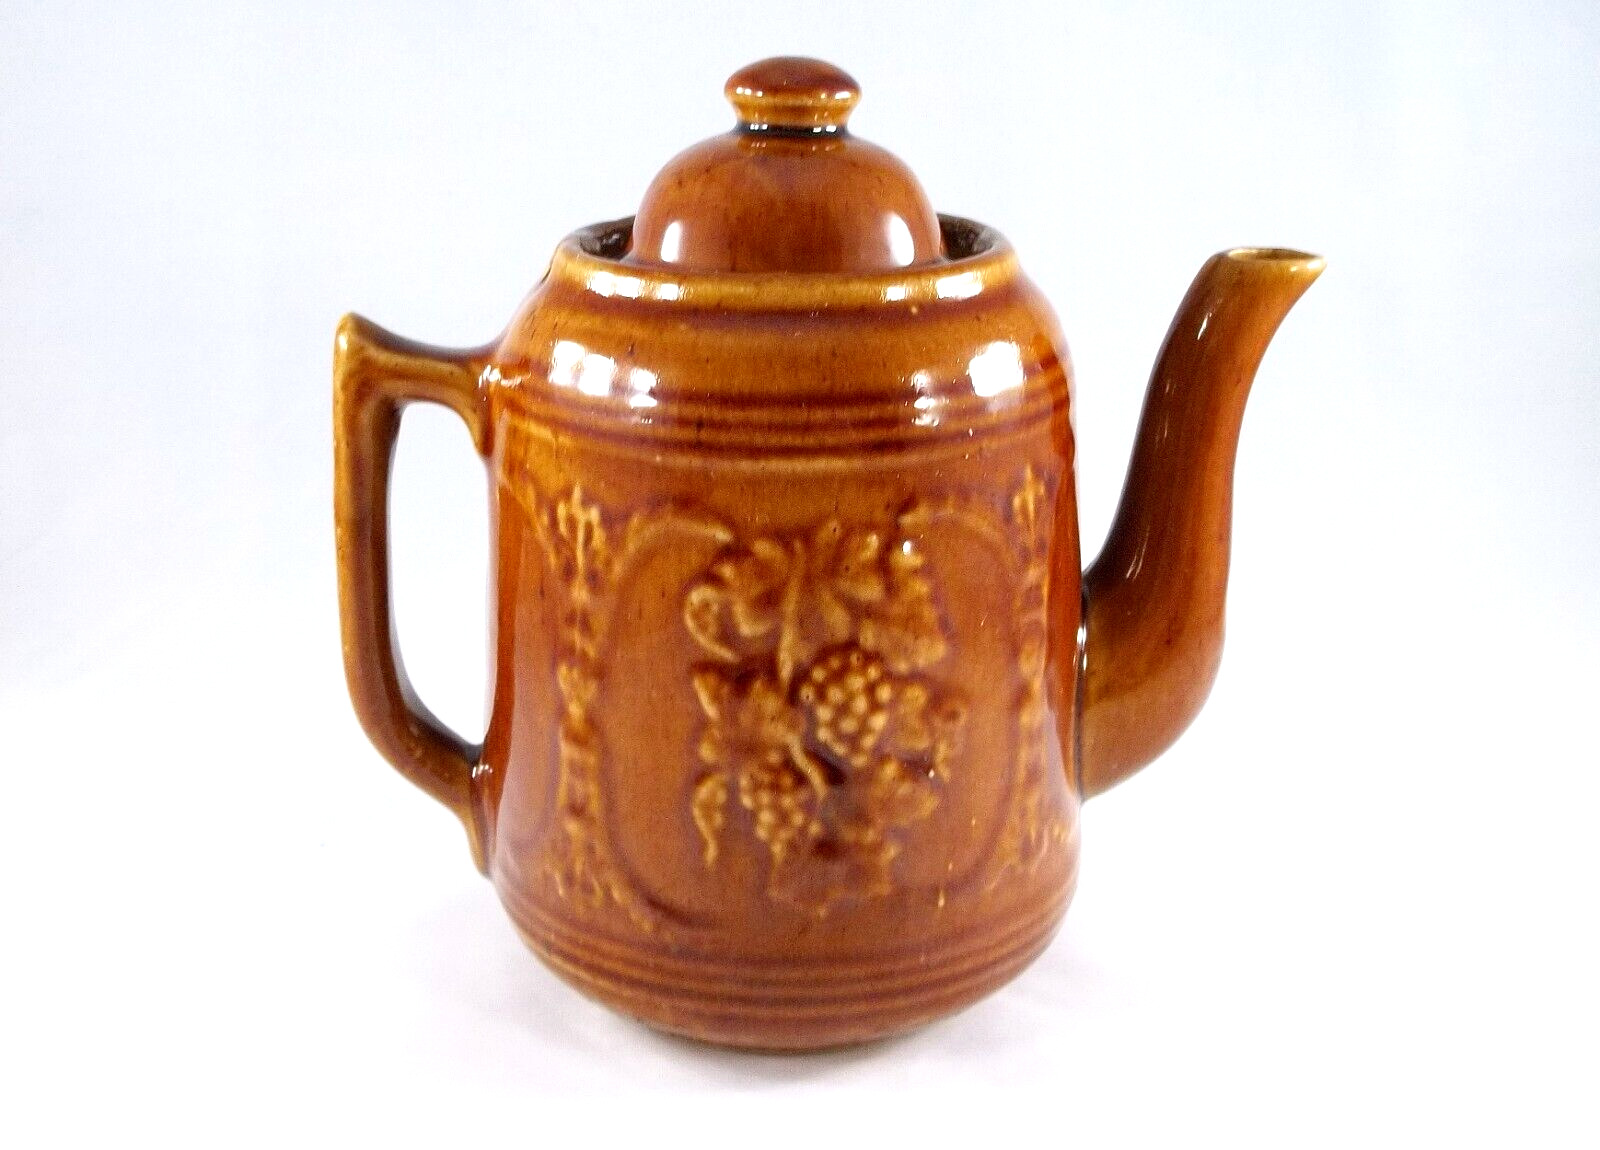 Antique Rustic Brown Stoneware Teapot Grapes & Leaves Harvest Pattern, 4 Cups